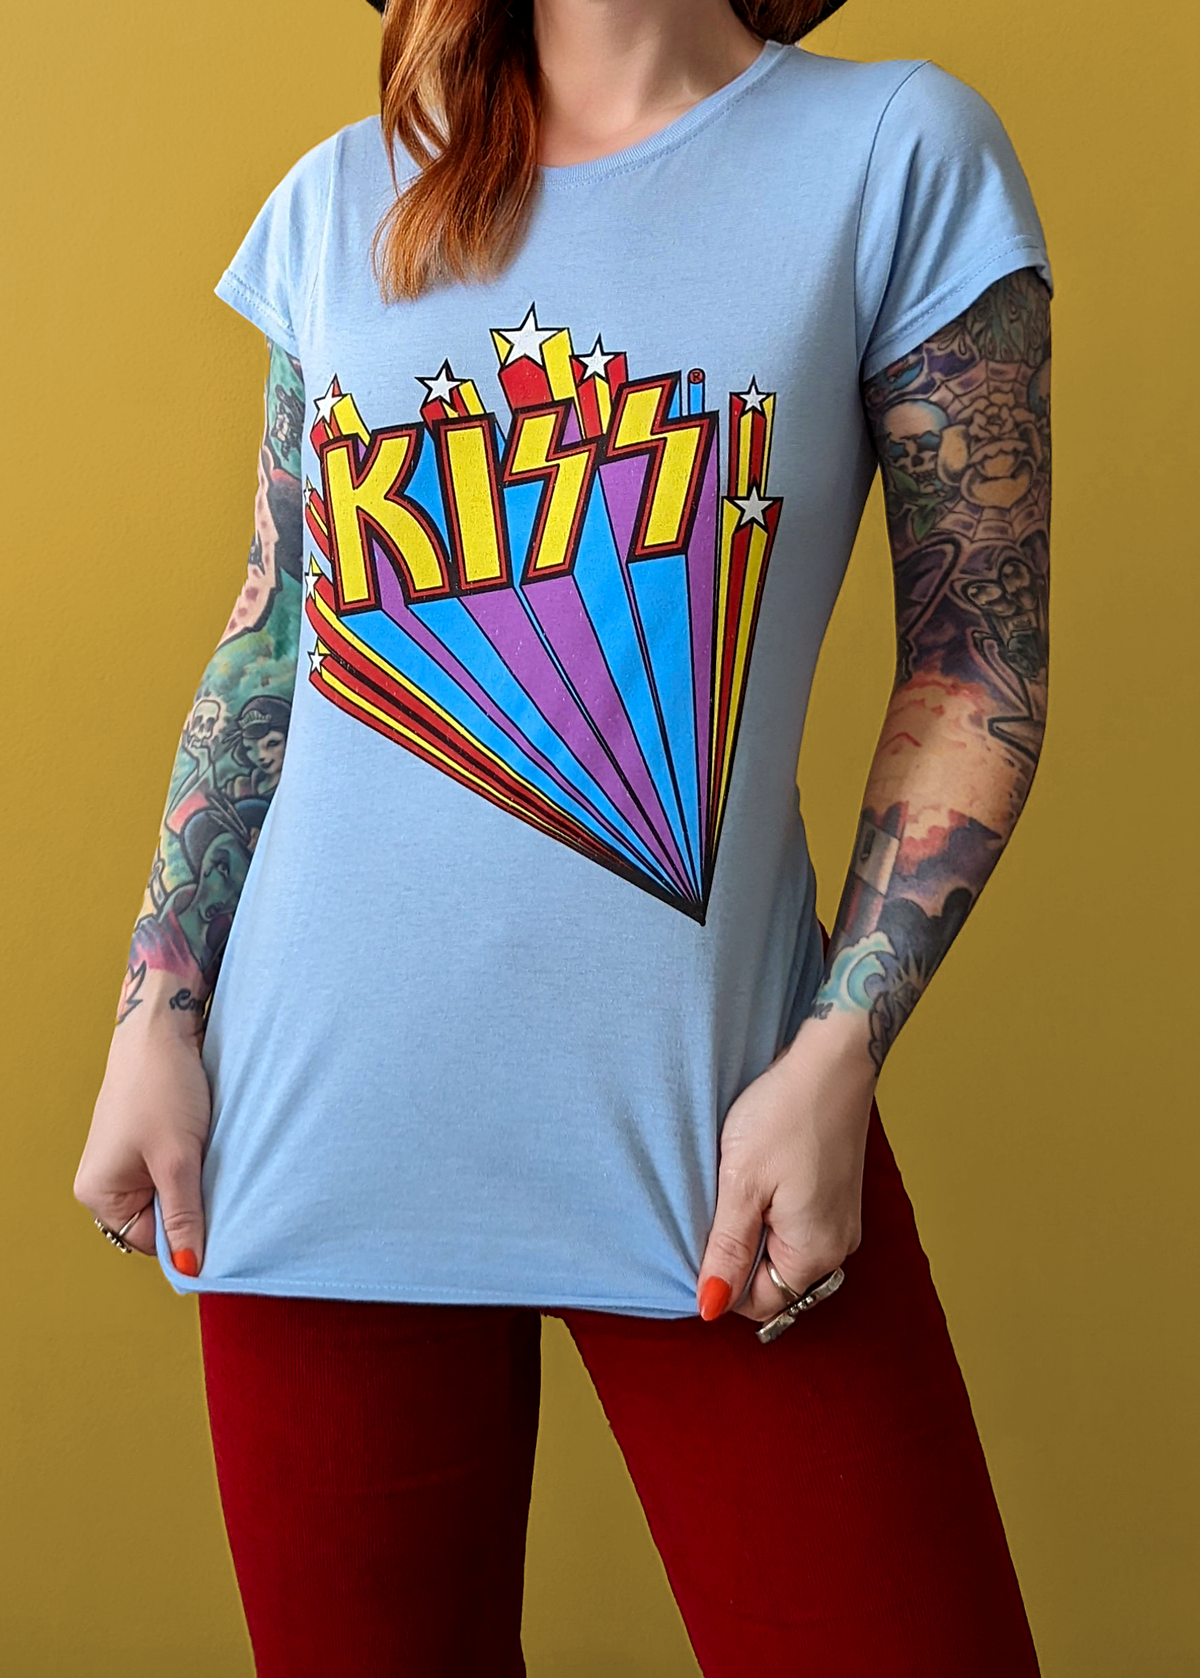 Retro Fitted sky blue KISS band tee with rainbow and stars design in yellow, purple, blue, and red. Officially licensed.